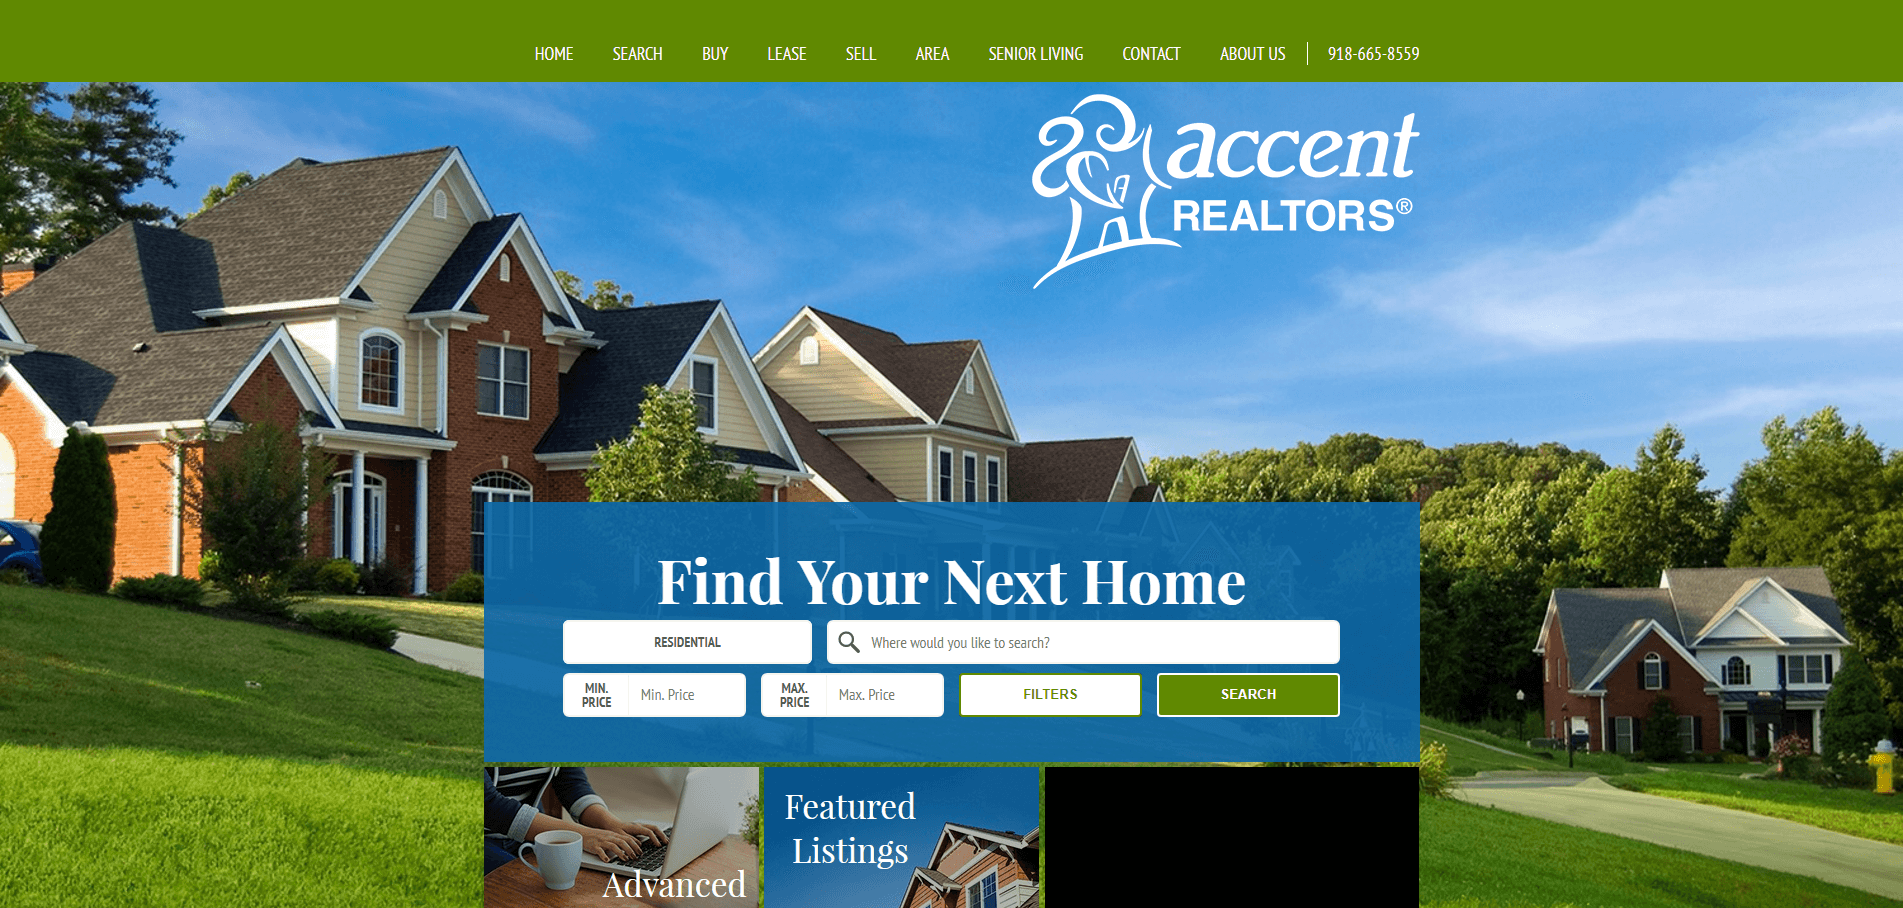  Incredible!  This list has 101 of the best real estate websites.  We ranked each site 1-101 and reviewed them all.  Here's accentrealtors.com.  Curious who made the list? 